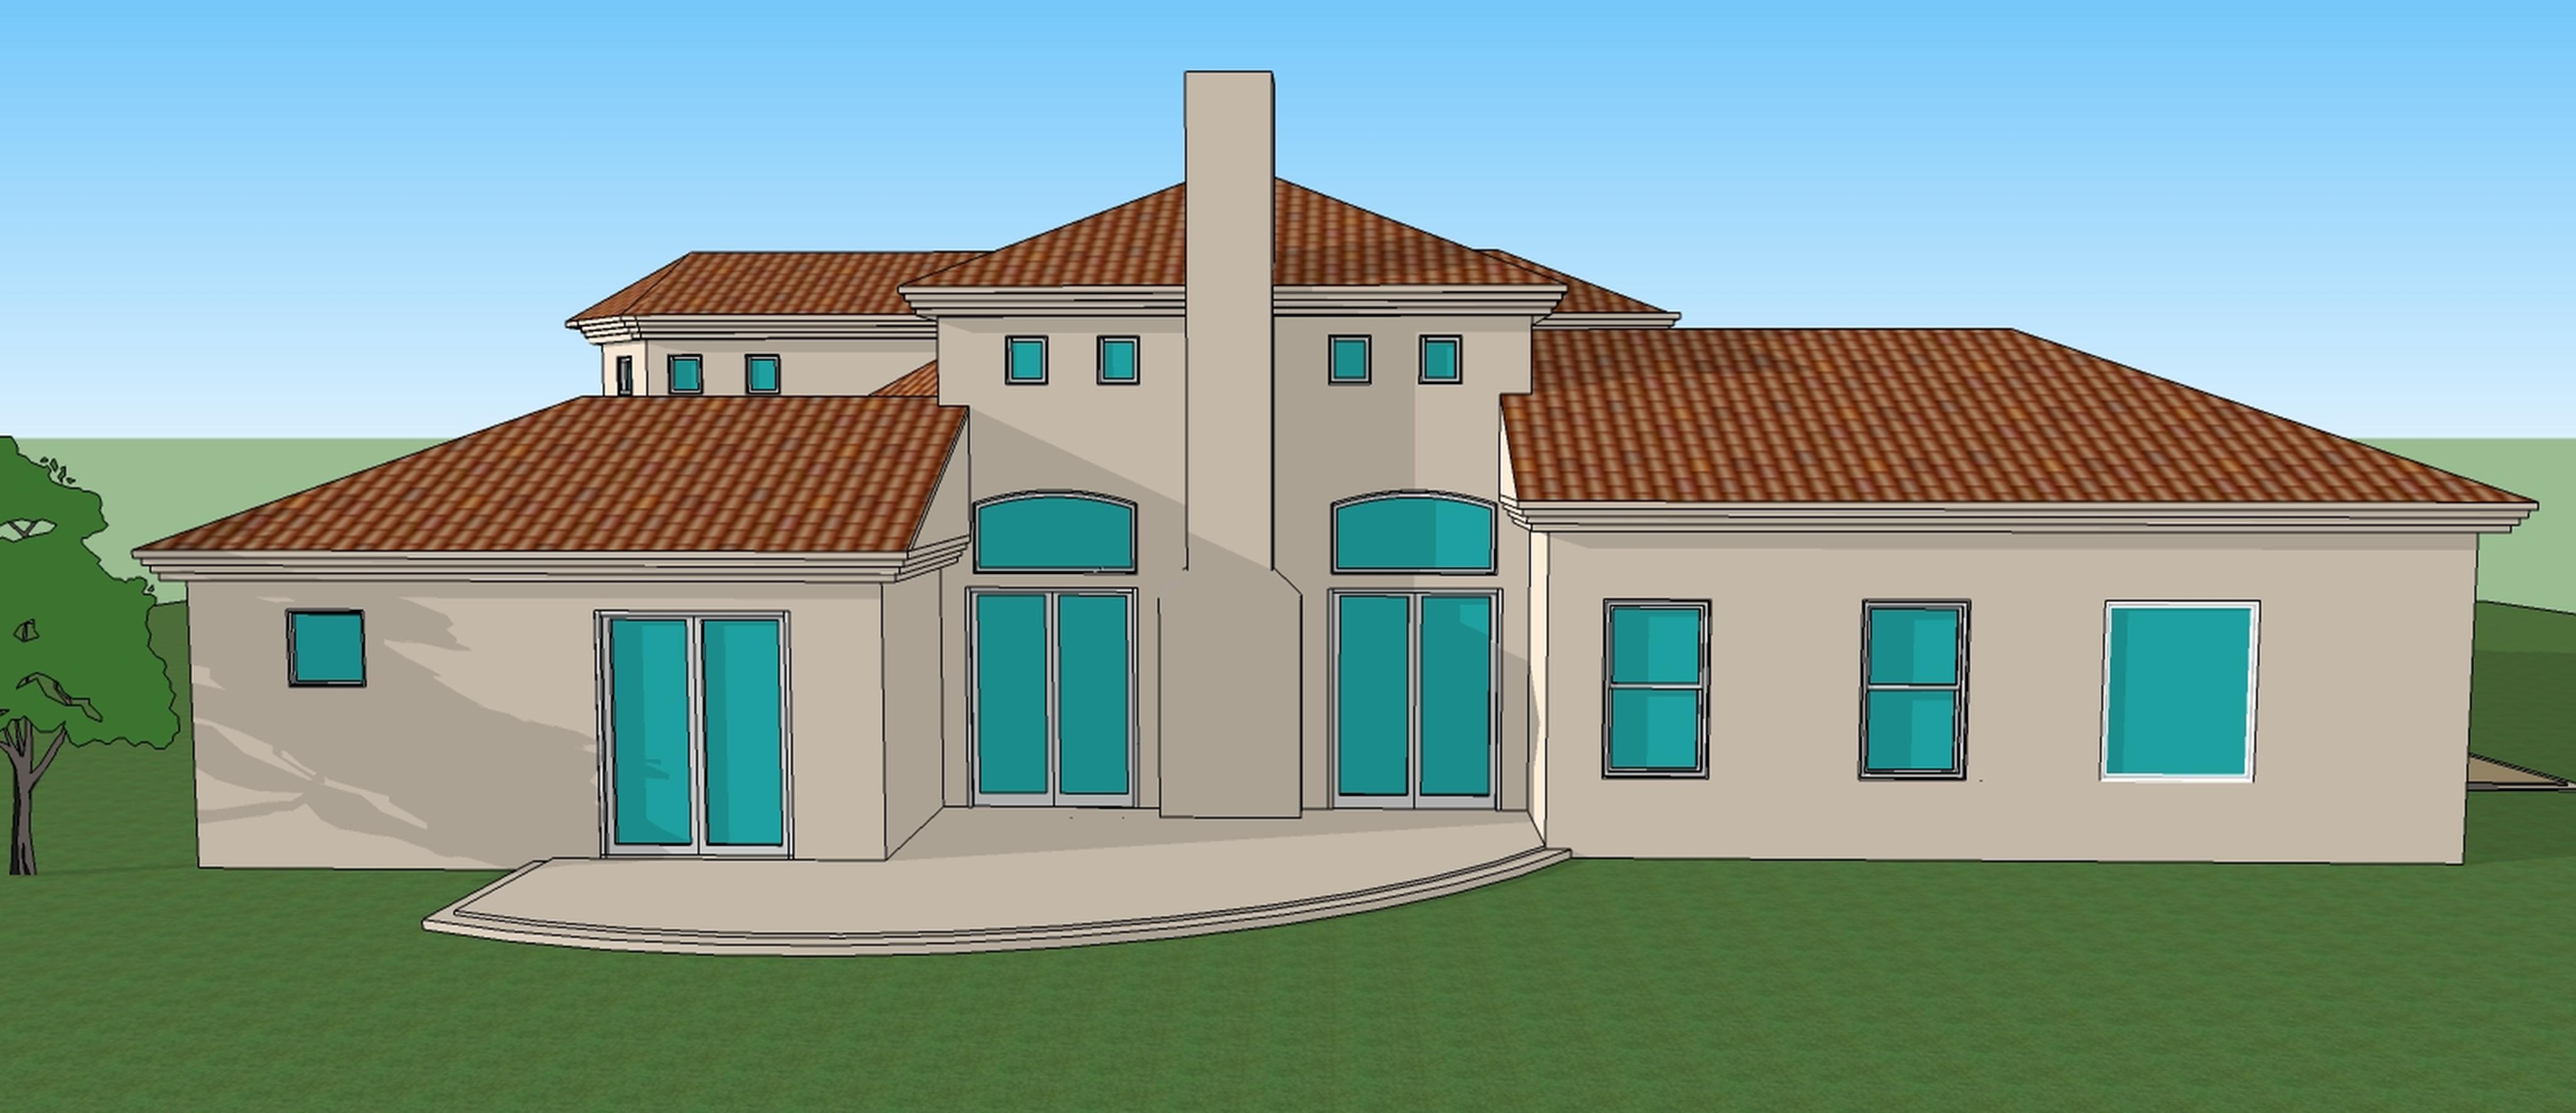 How To Draw 3d House Plan In Autocad Design Talk